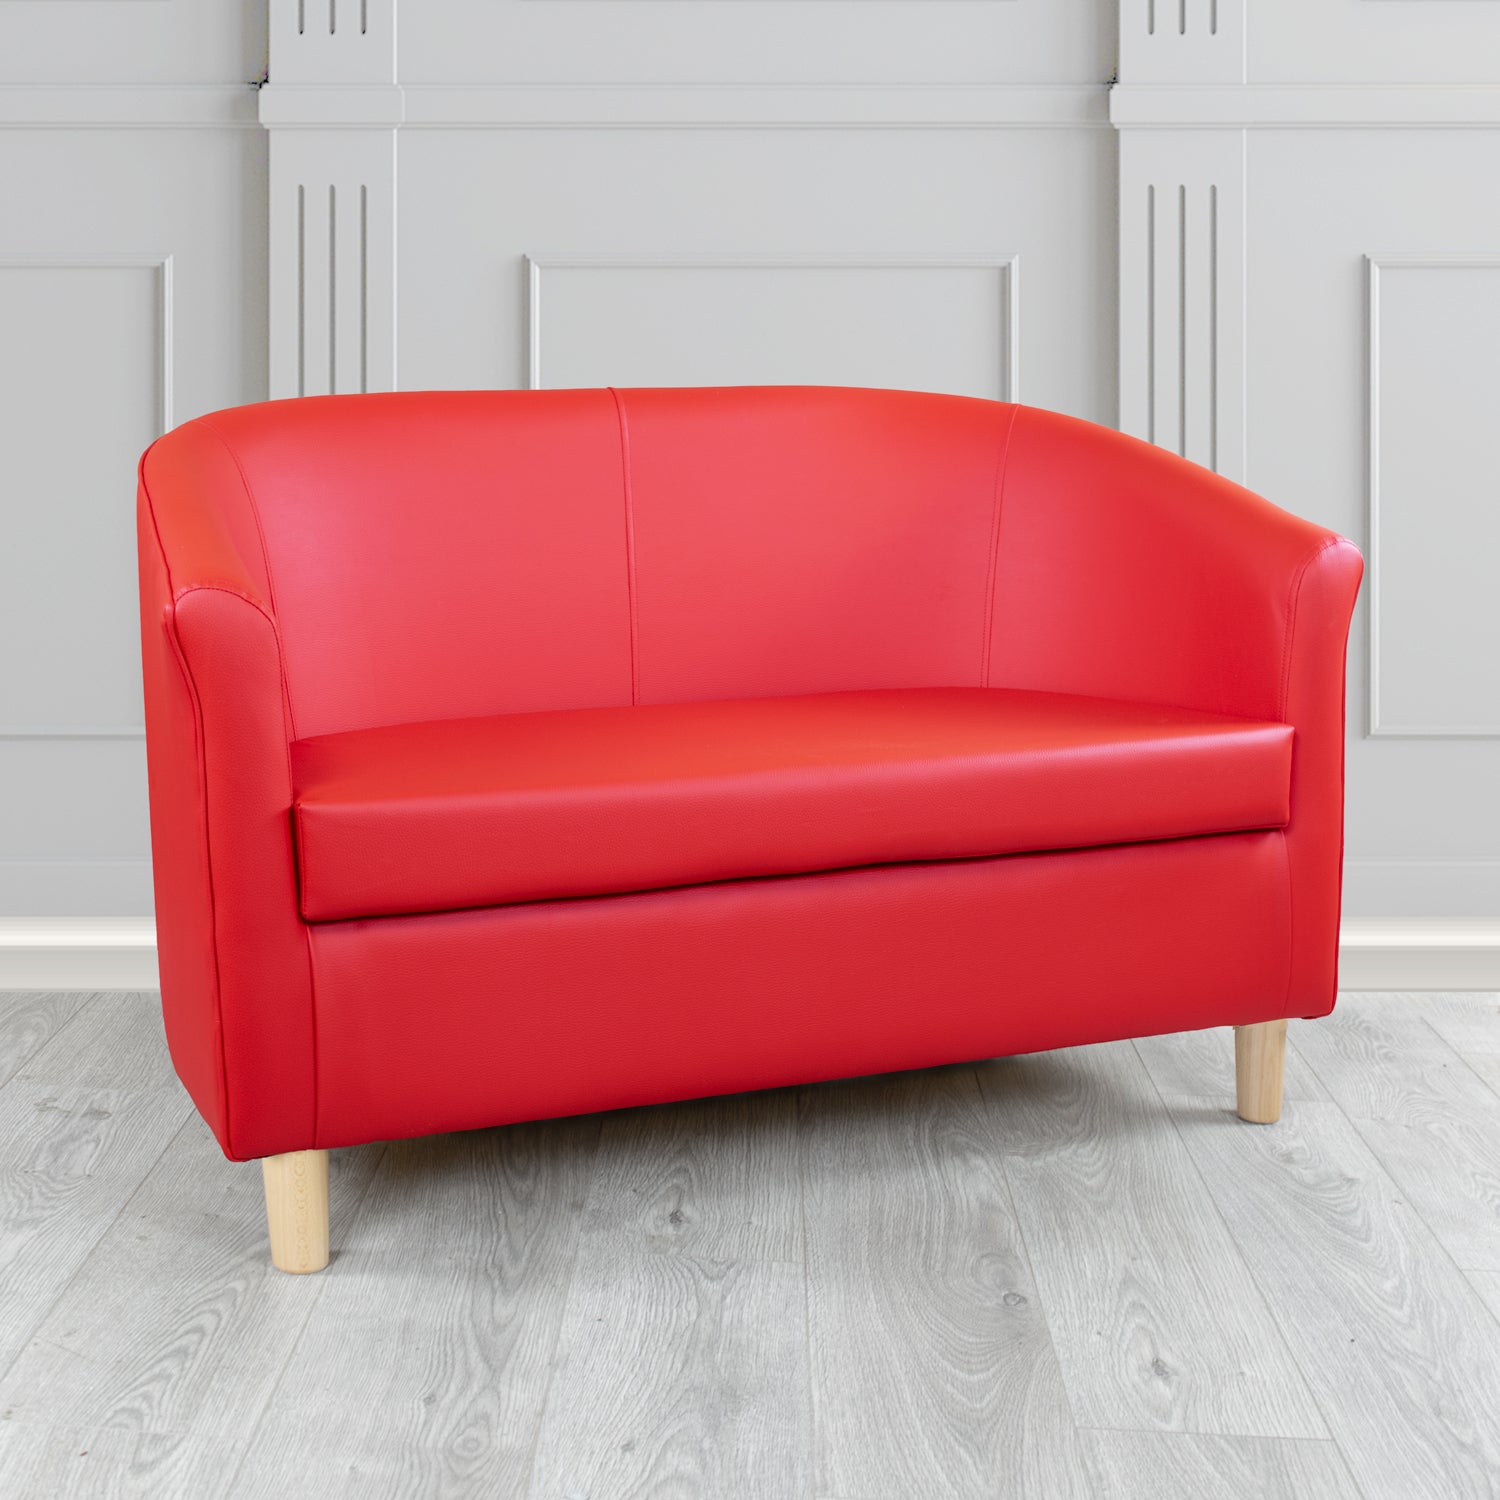 Tuscany 2 Seater Tub Sofa in Madrid Rouge Faux Leather - The Tub Chair Shop